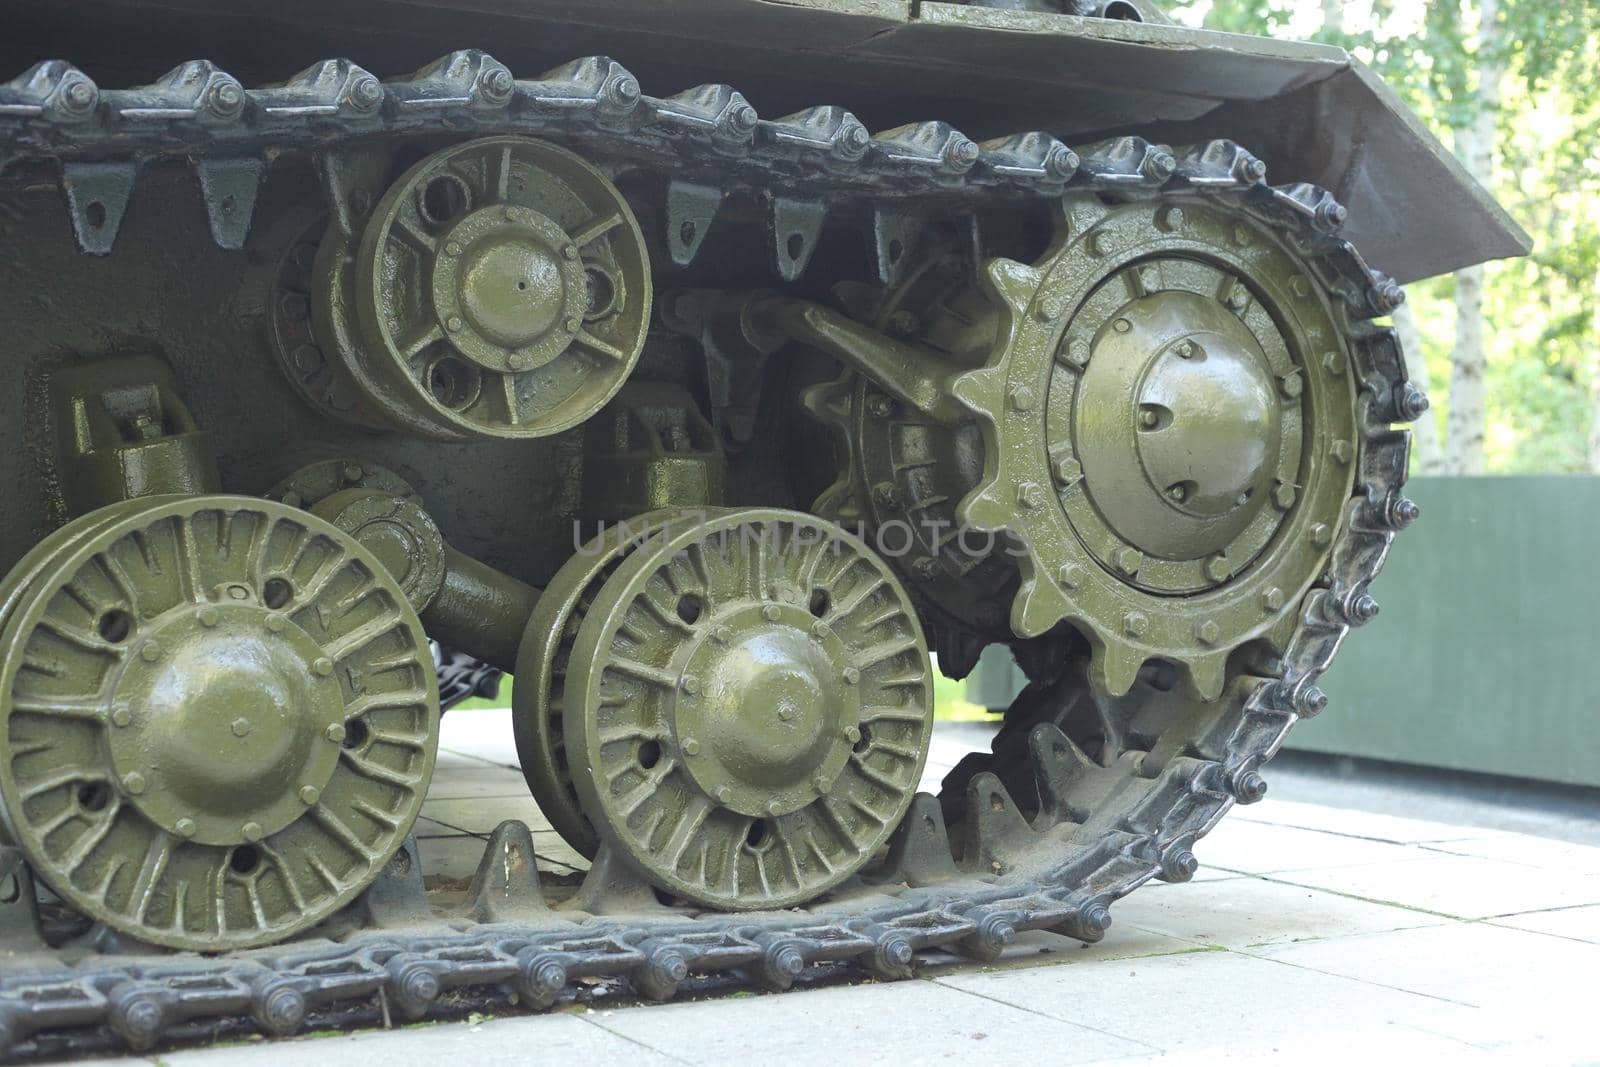 chain tracks of the tank